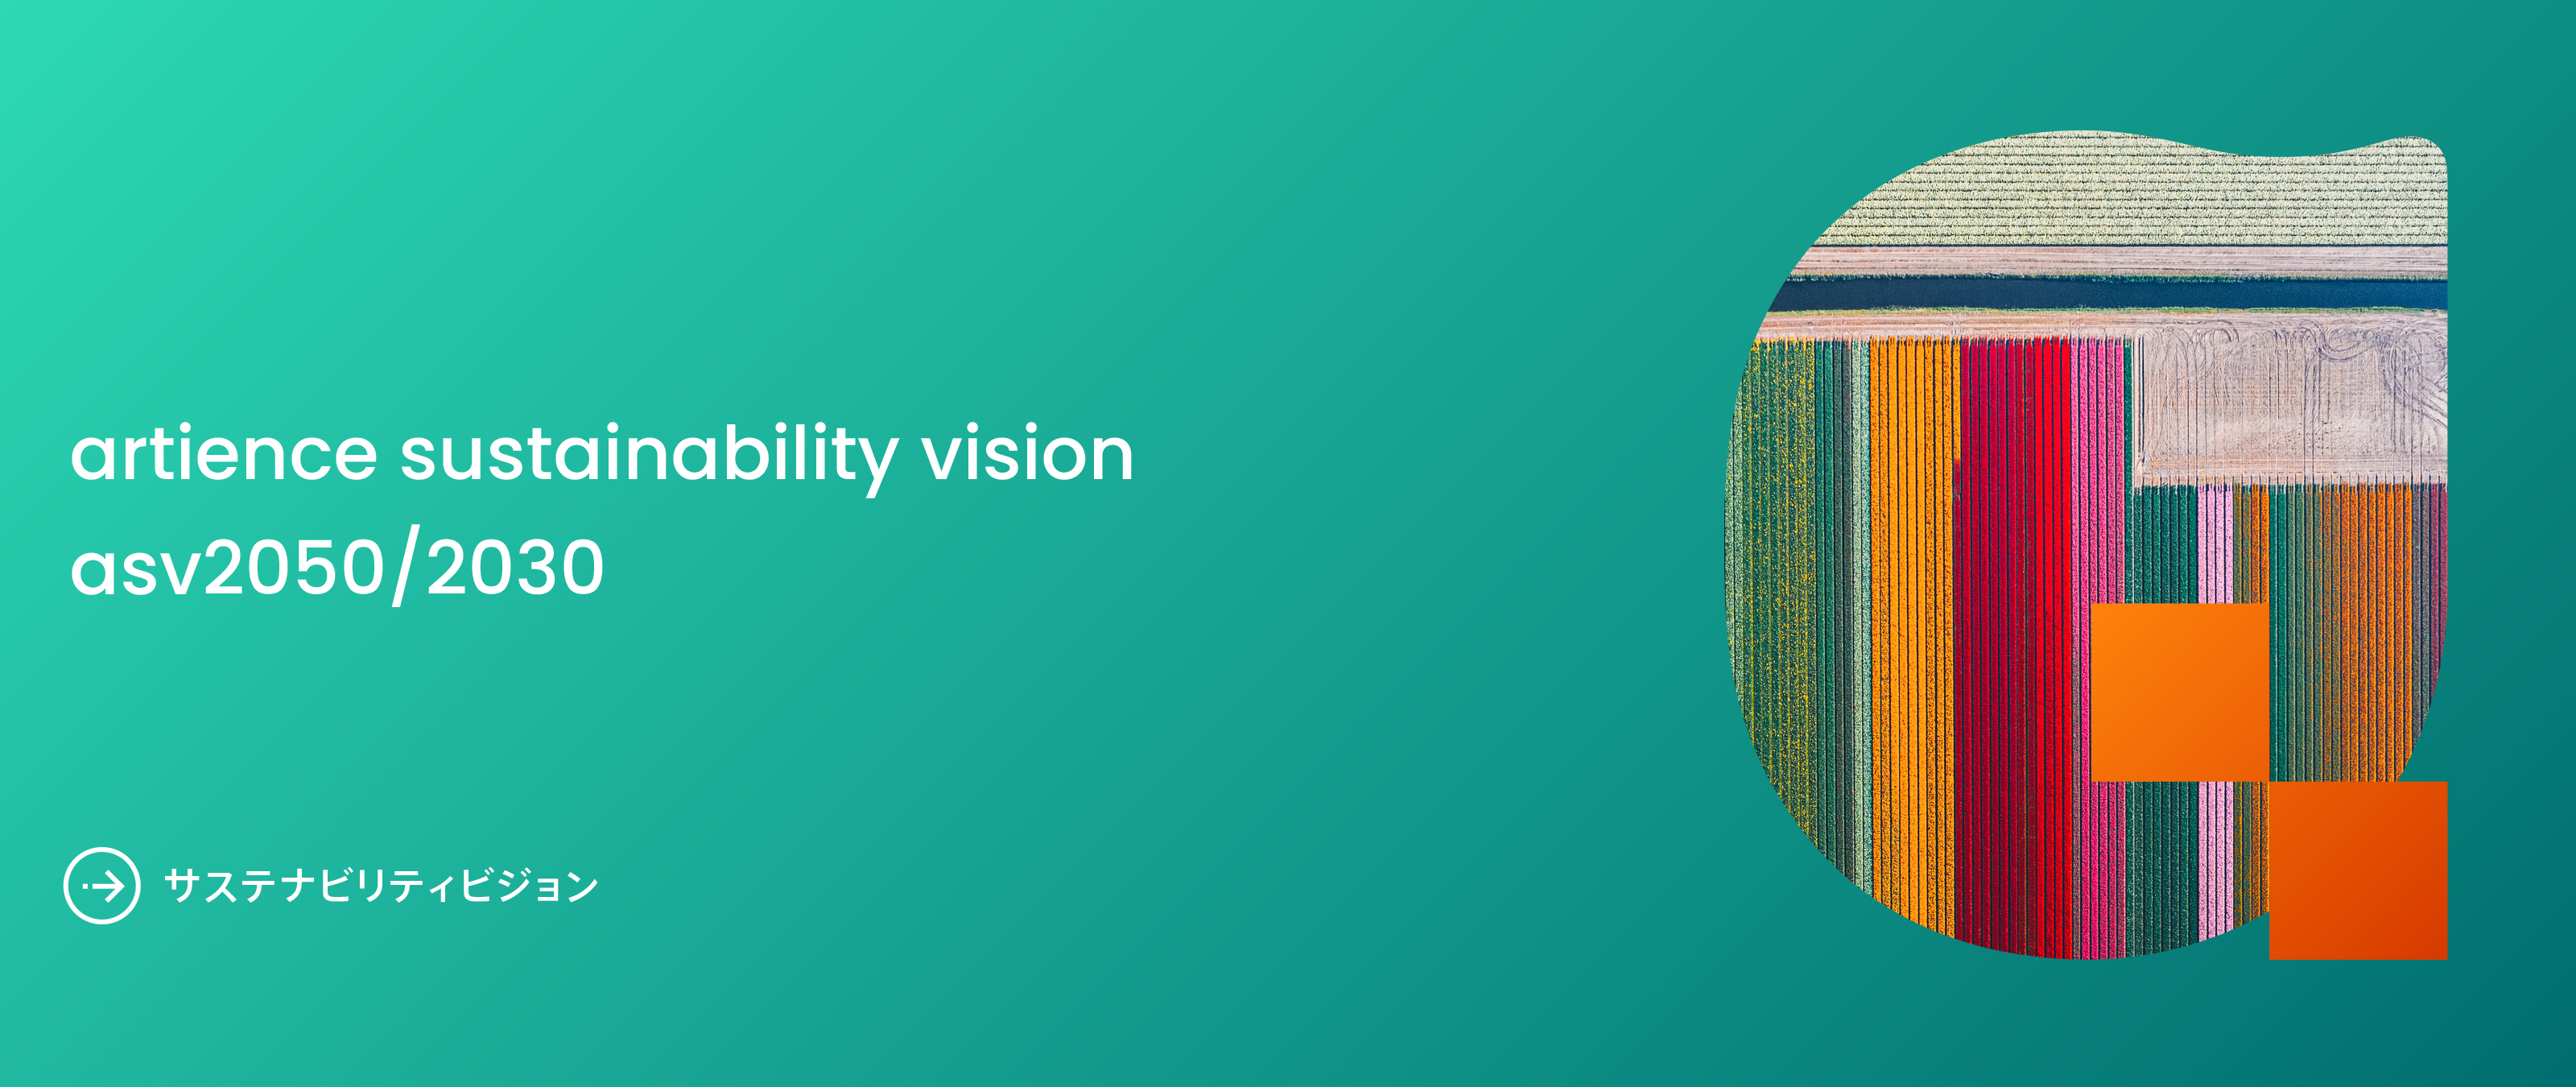 artience Sustainability Vision 2050/2030